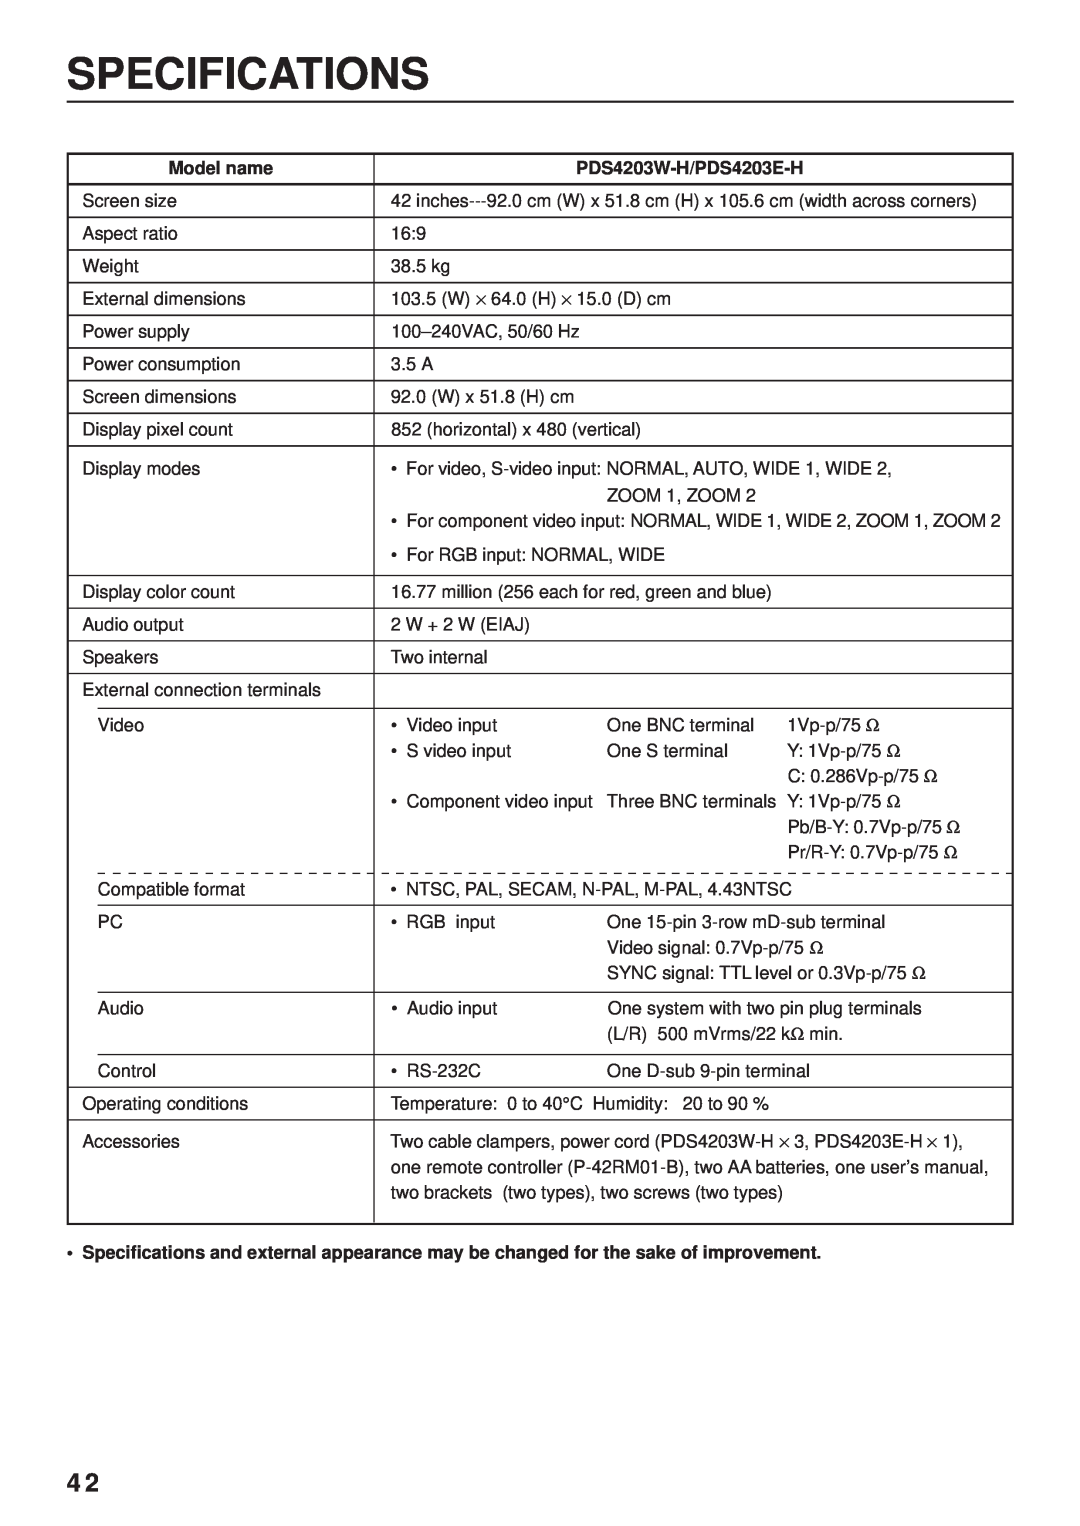 Fujitsu PDS4203W-H / PDS4203E-H user manual Specifications, Model name, PDS4203W-H/PDS4203E-H 